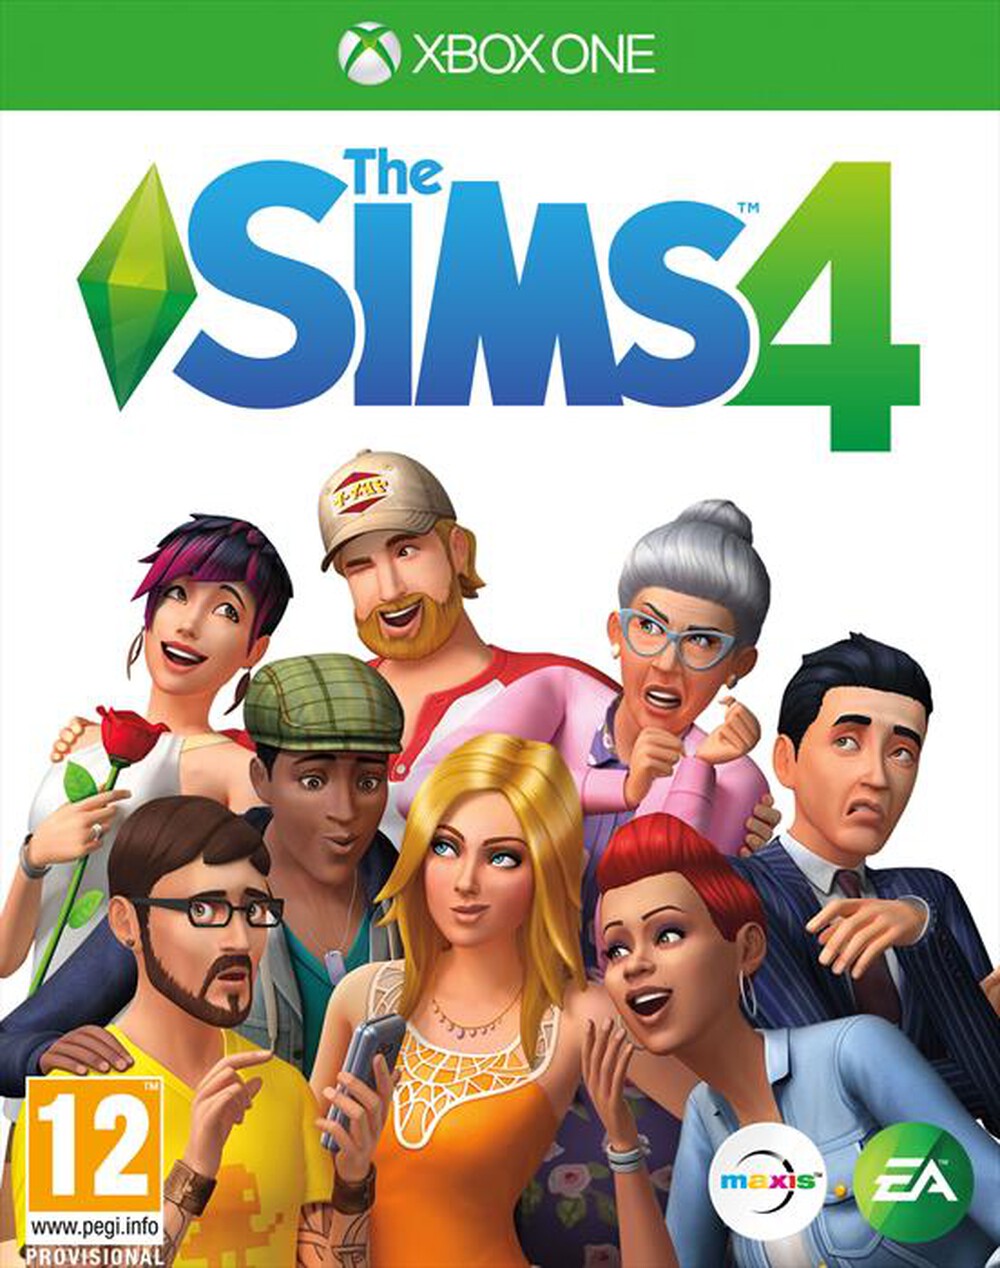 "ELECTRONIC ARTS - The Sims 4 XBox One"